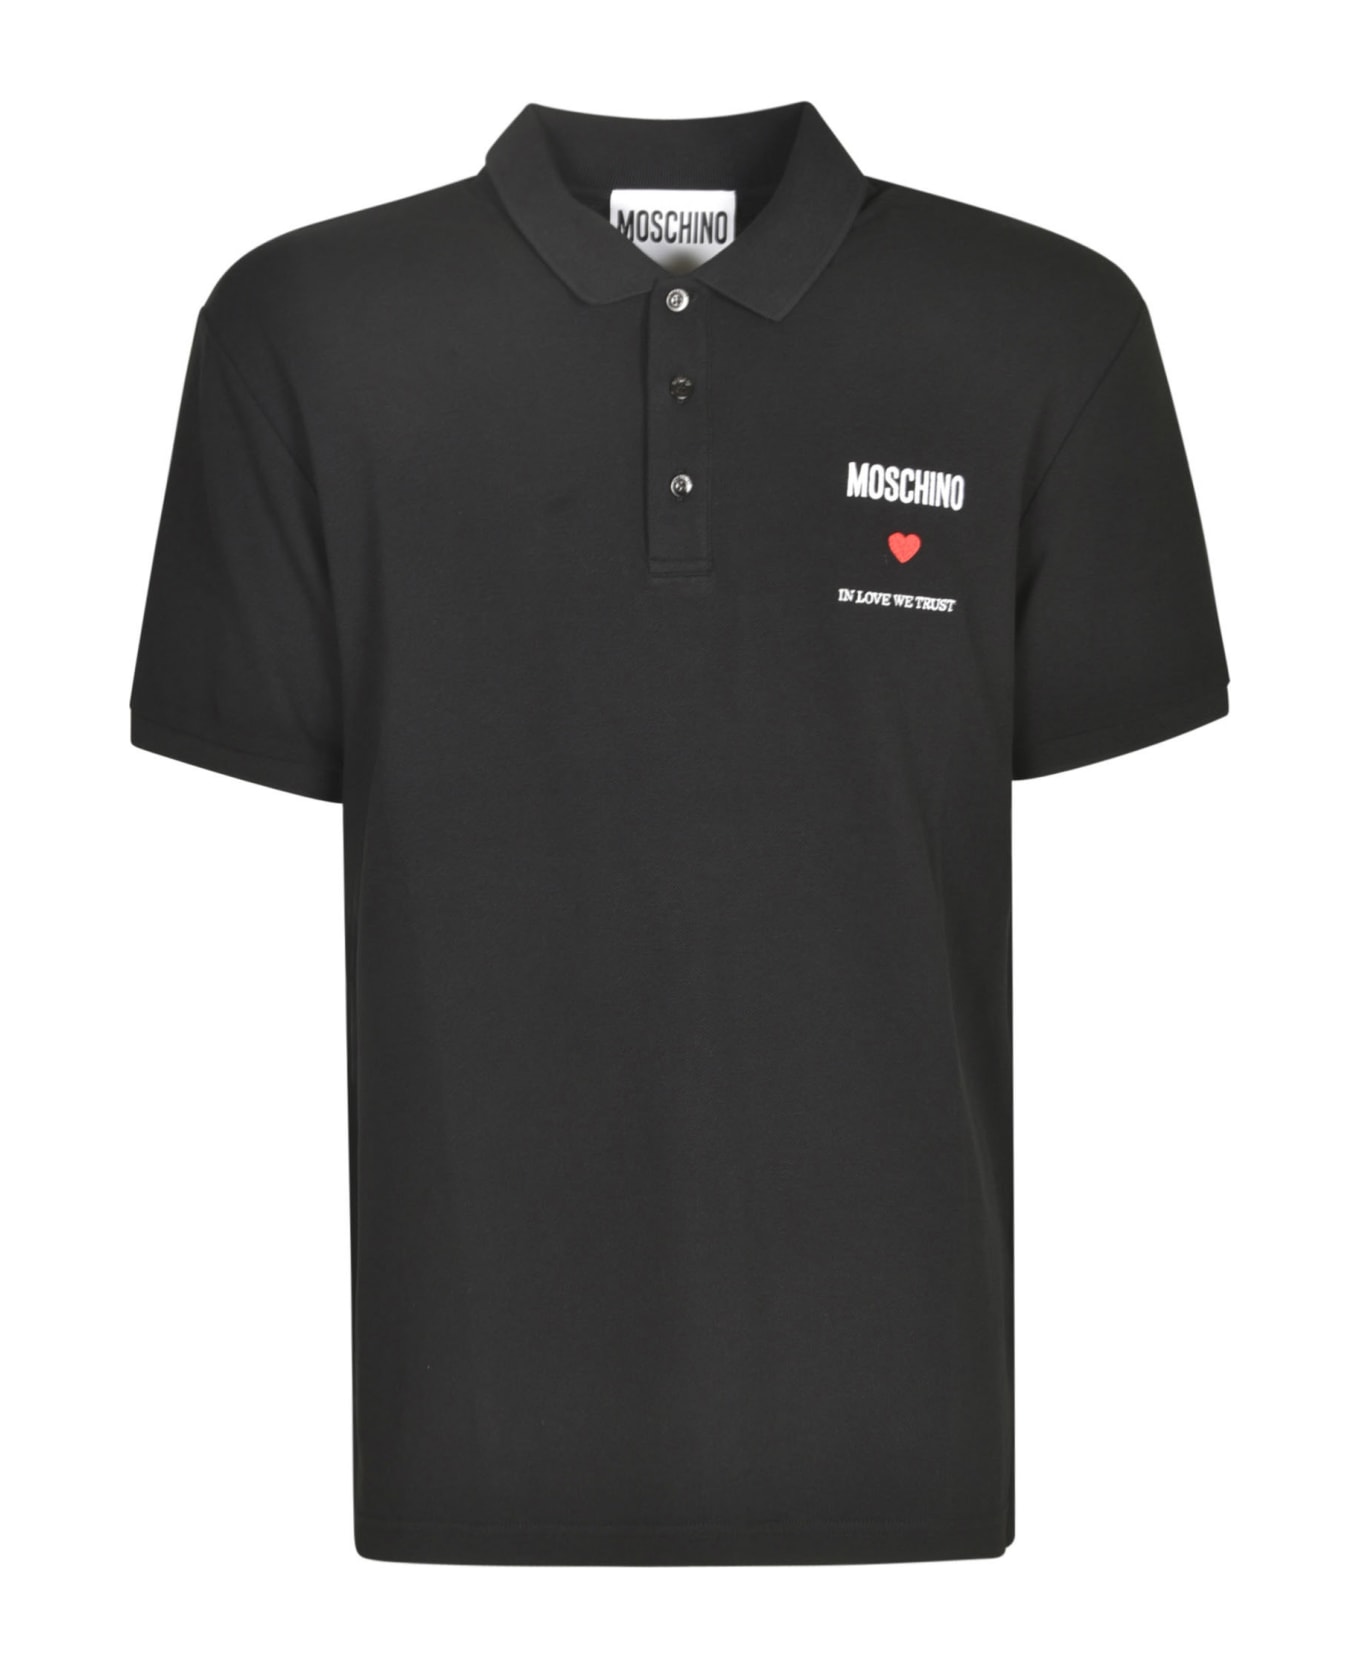 Moschino In Love We Trust Polo Shirt - Black